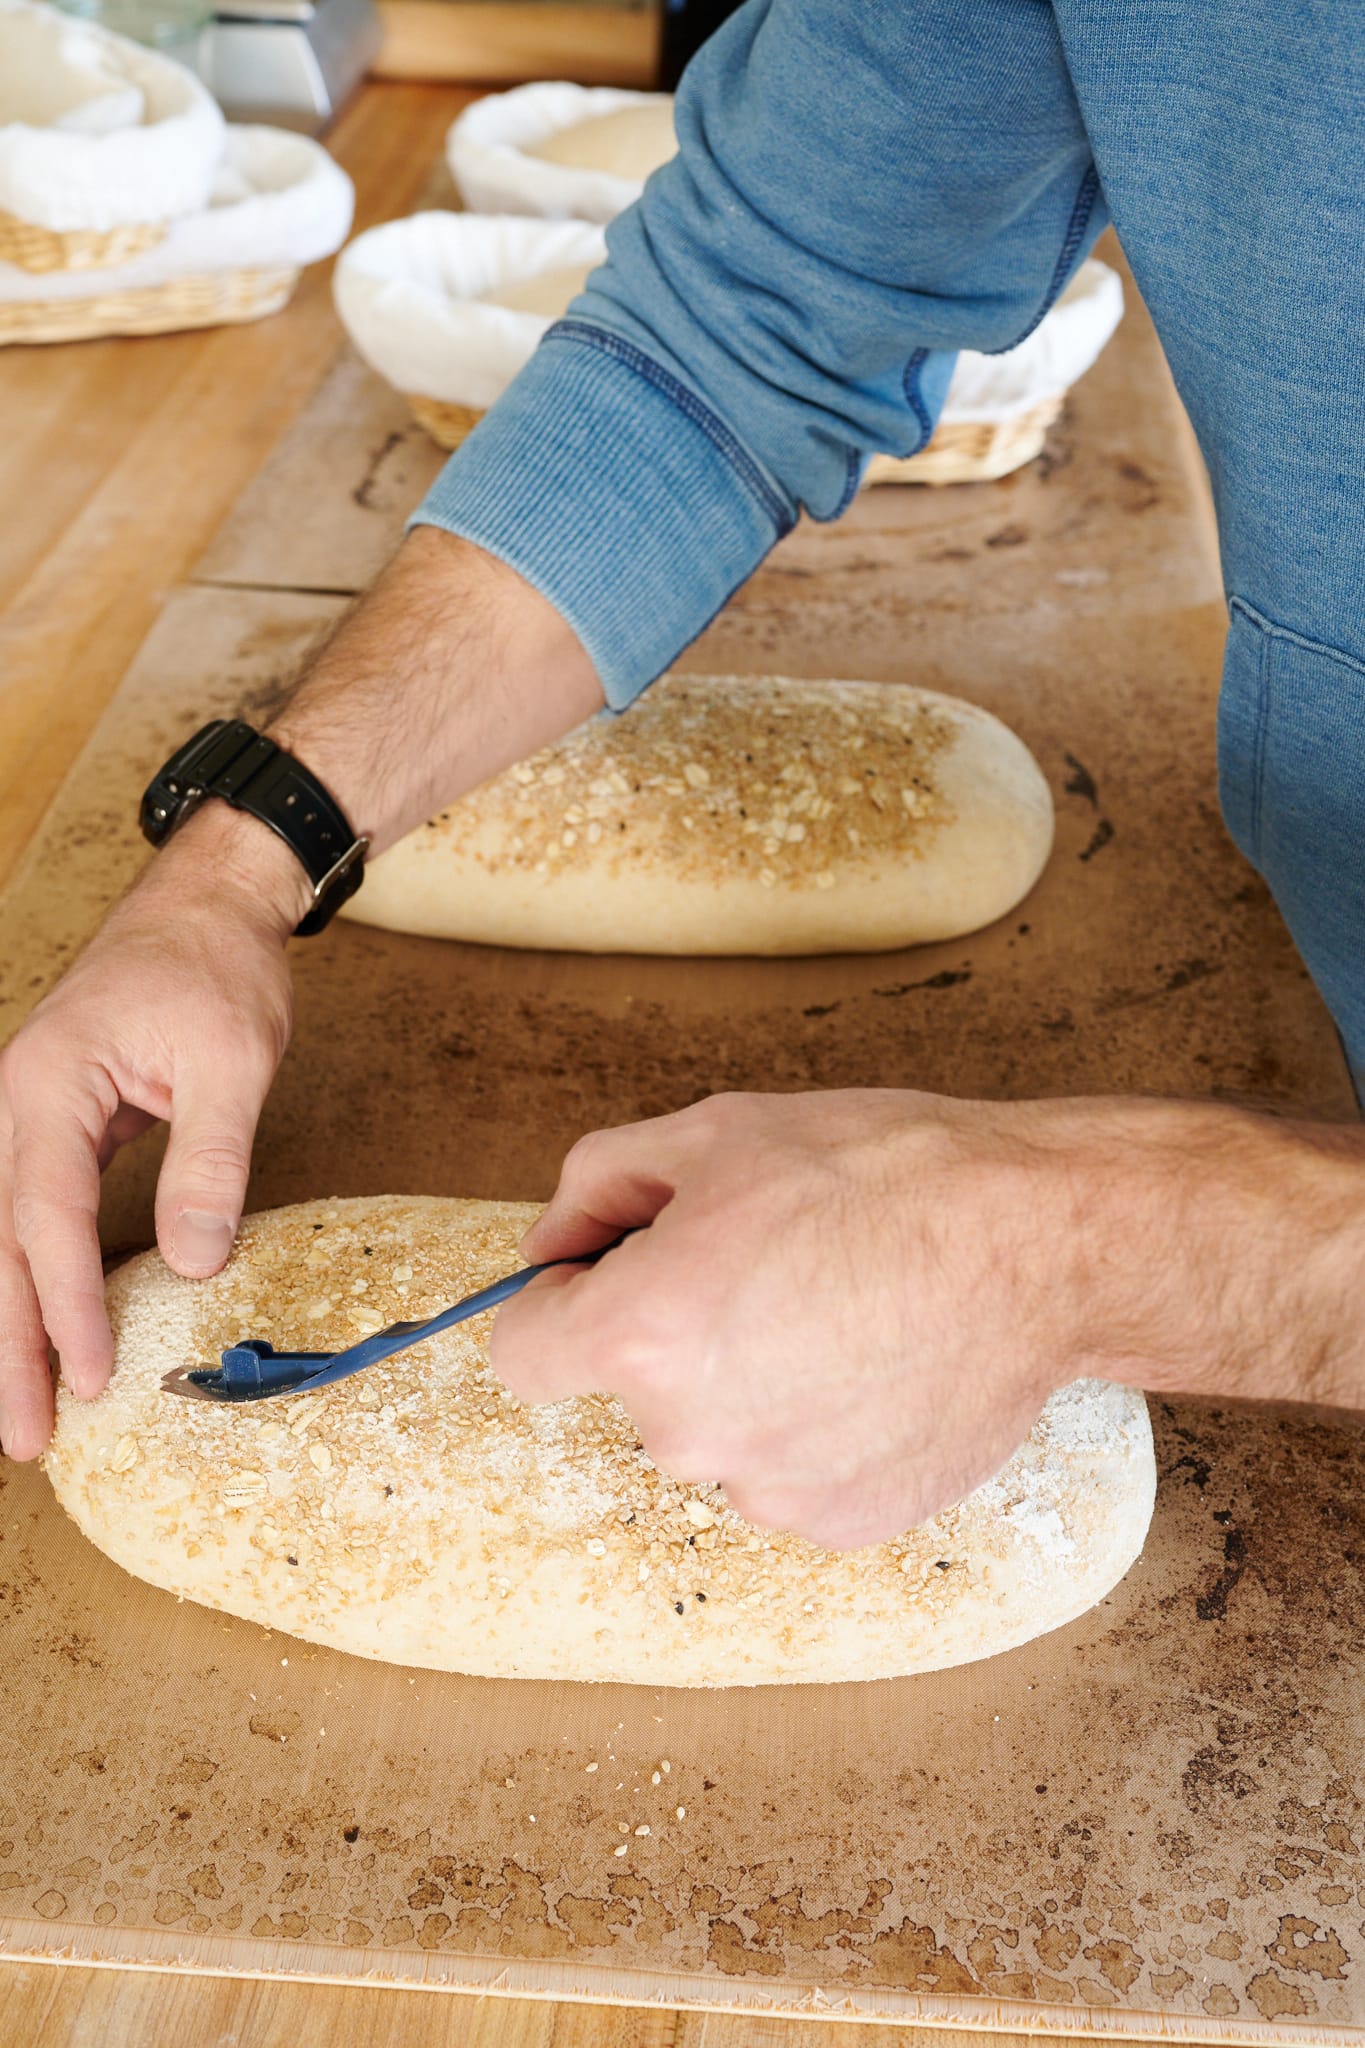 Scoring bread dough before baking in the RackMaster oven.